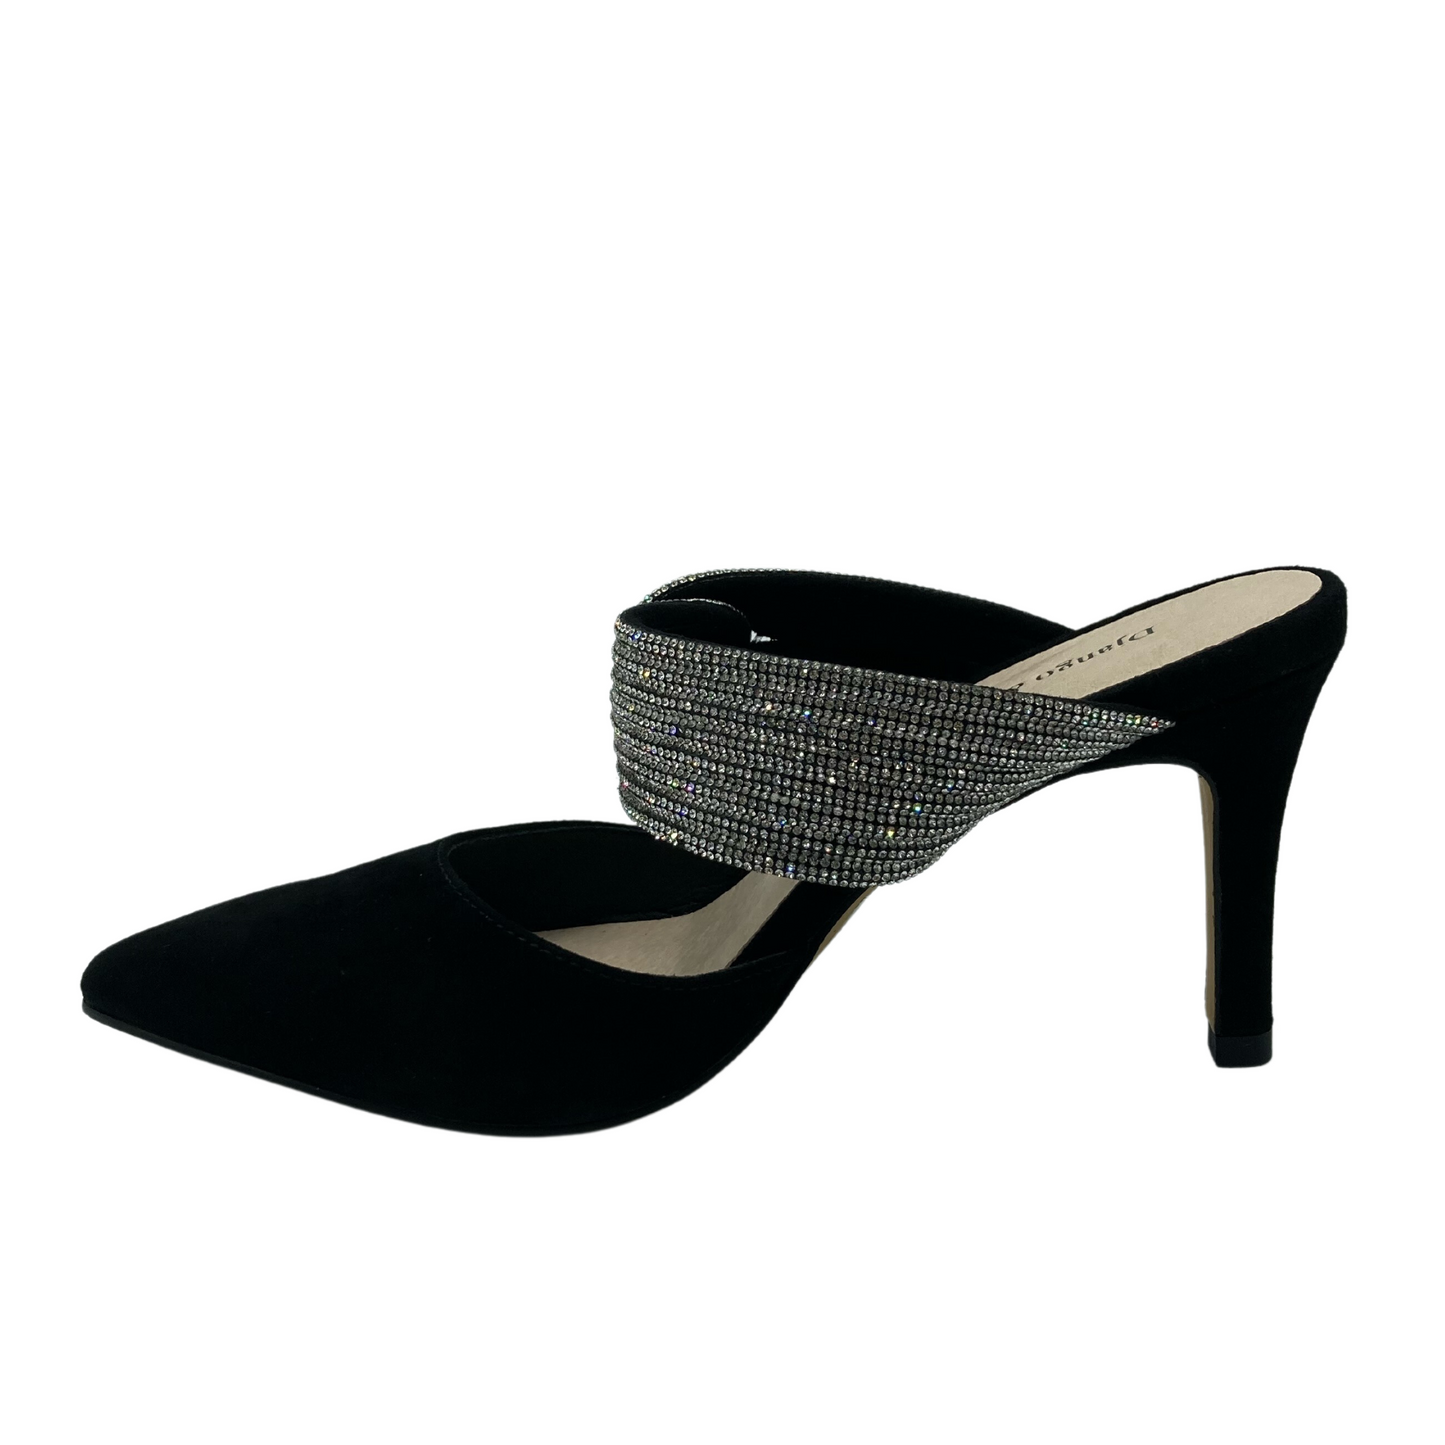 Left facing view of black suede heel with pointed toe and gem studded strap